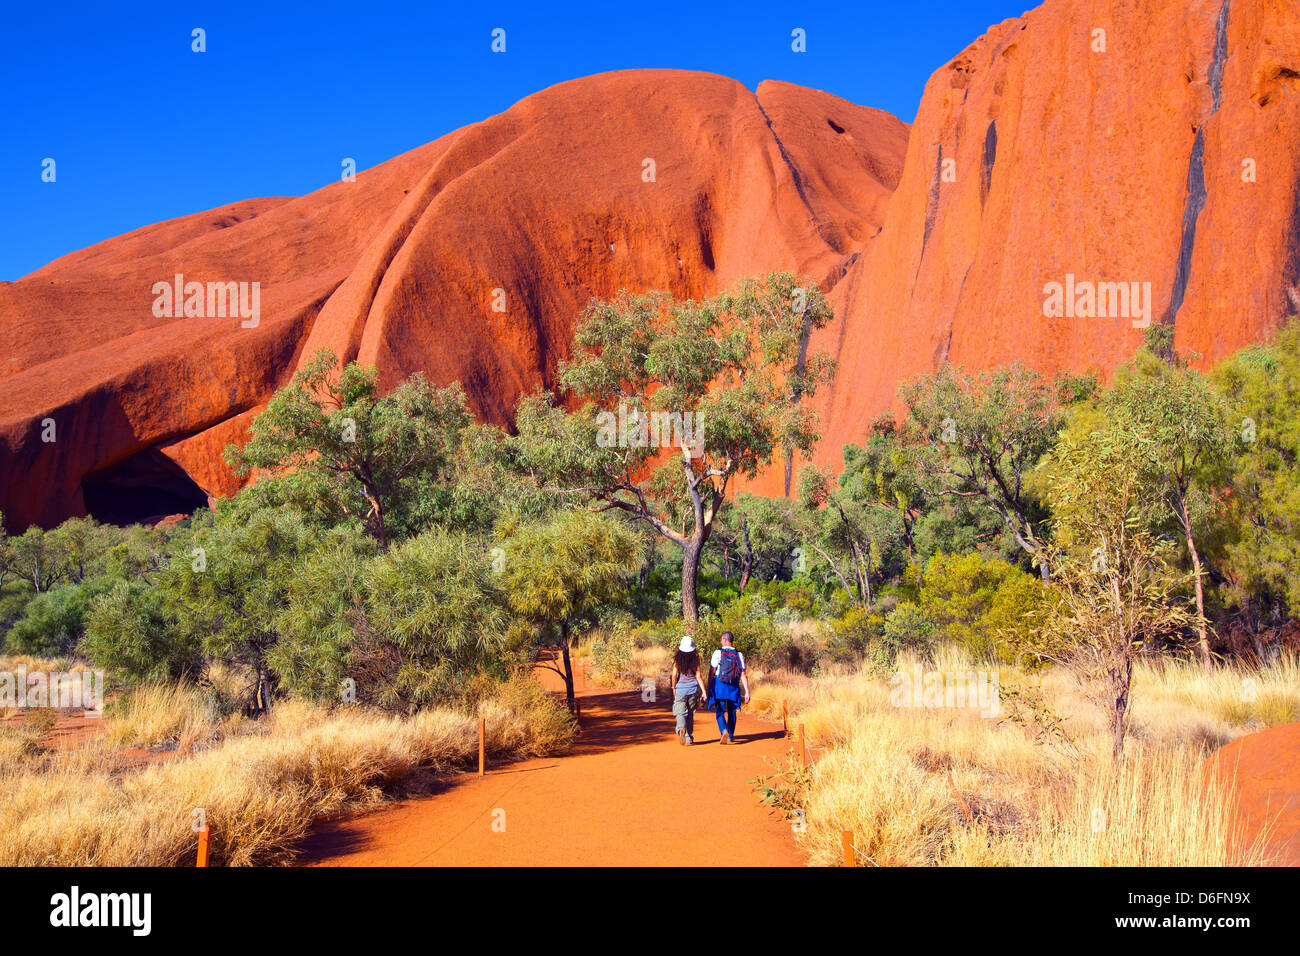 landscape landscapes outback Australian Uluru Ayers Rock in the Northern Territory Central Australia Stock Photo